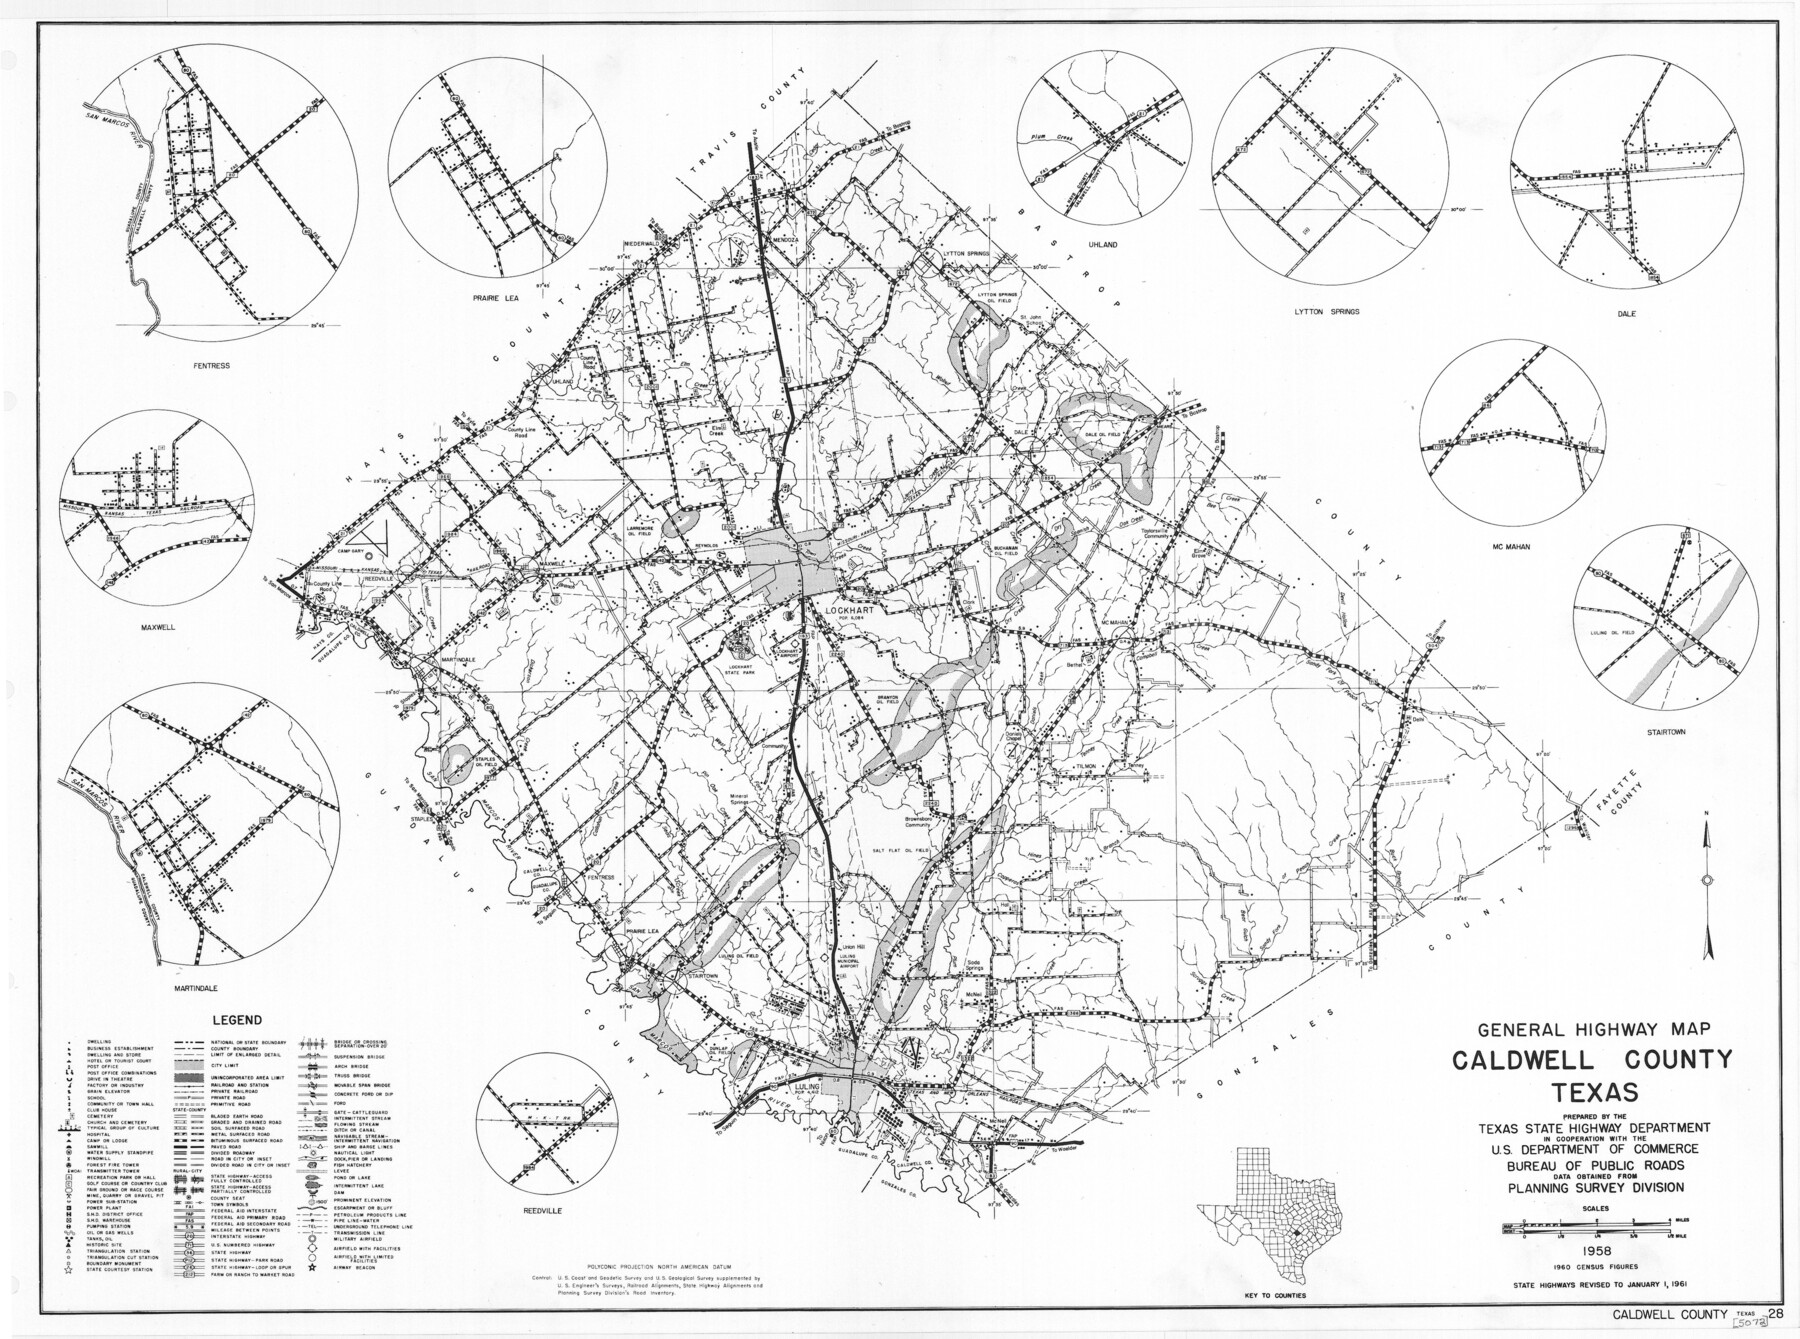 79394, General Highway Map, Caldwell County, Texas, Texas State Library and Archives